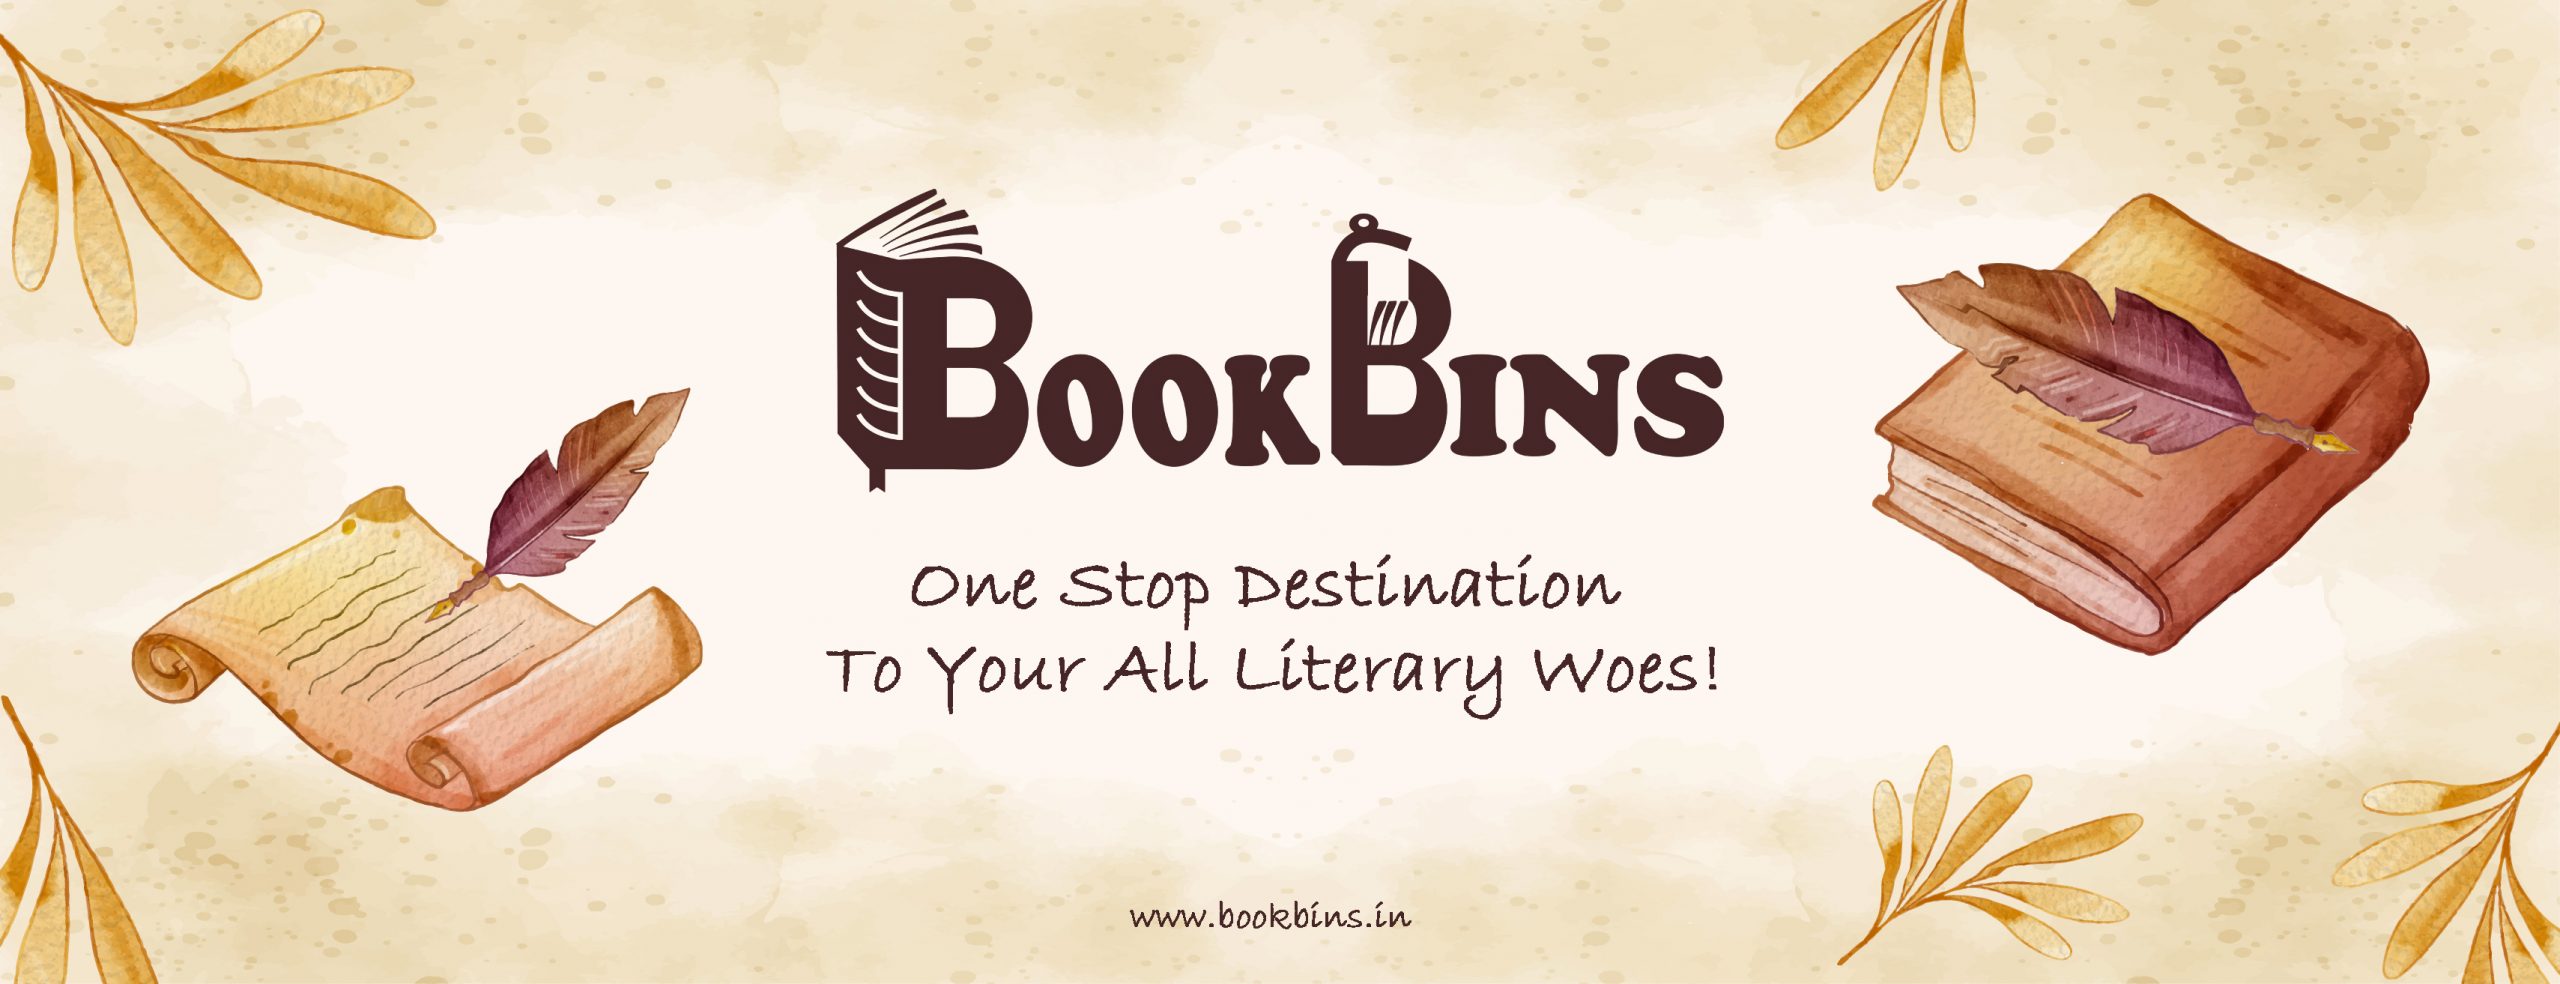 Find India's Largest Online Book Store